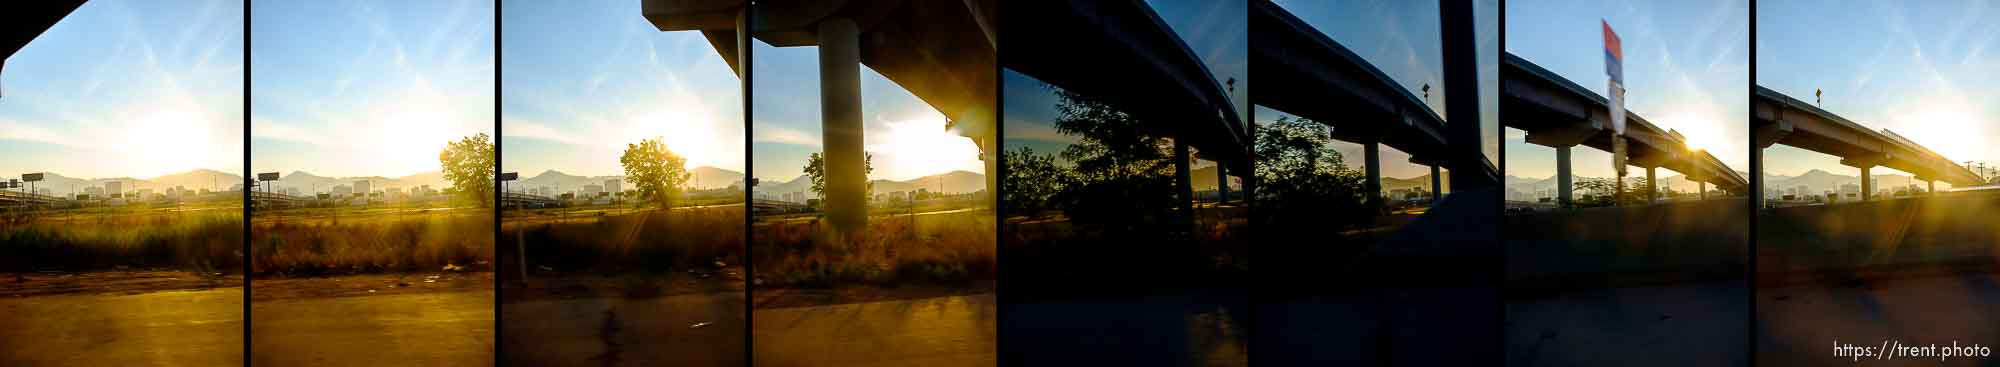 driving, Sunday, August 10, 2014.